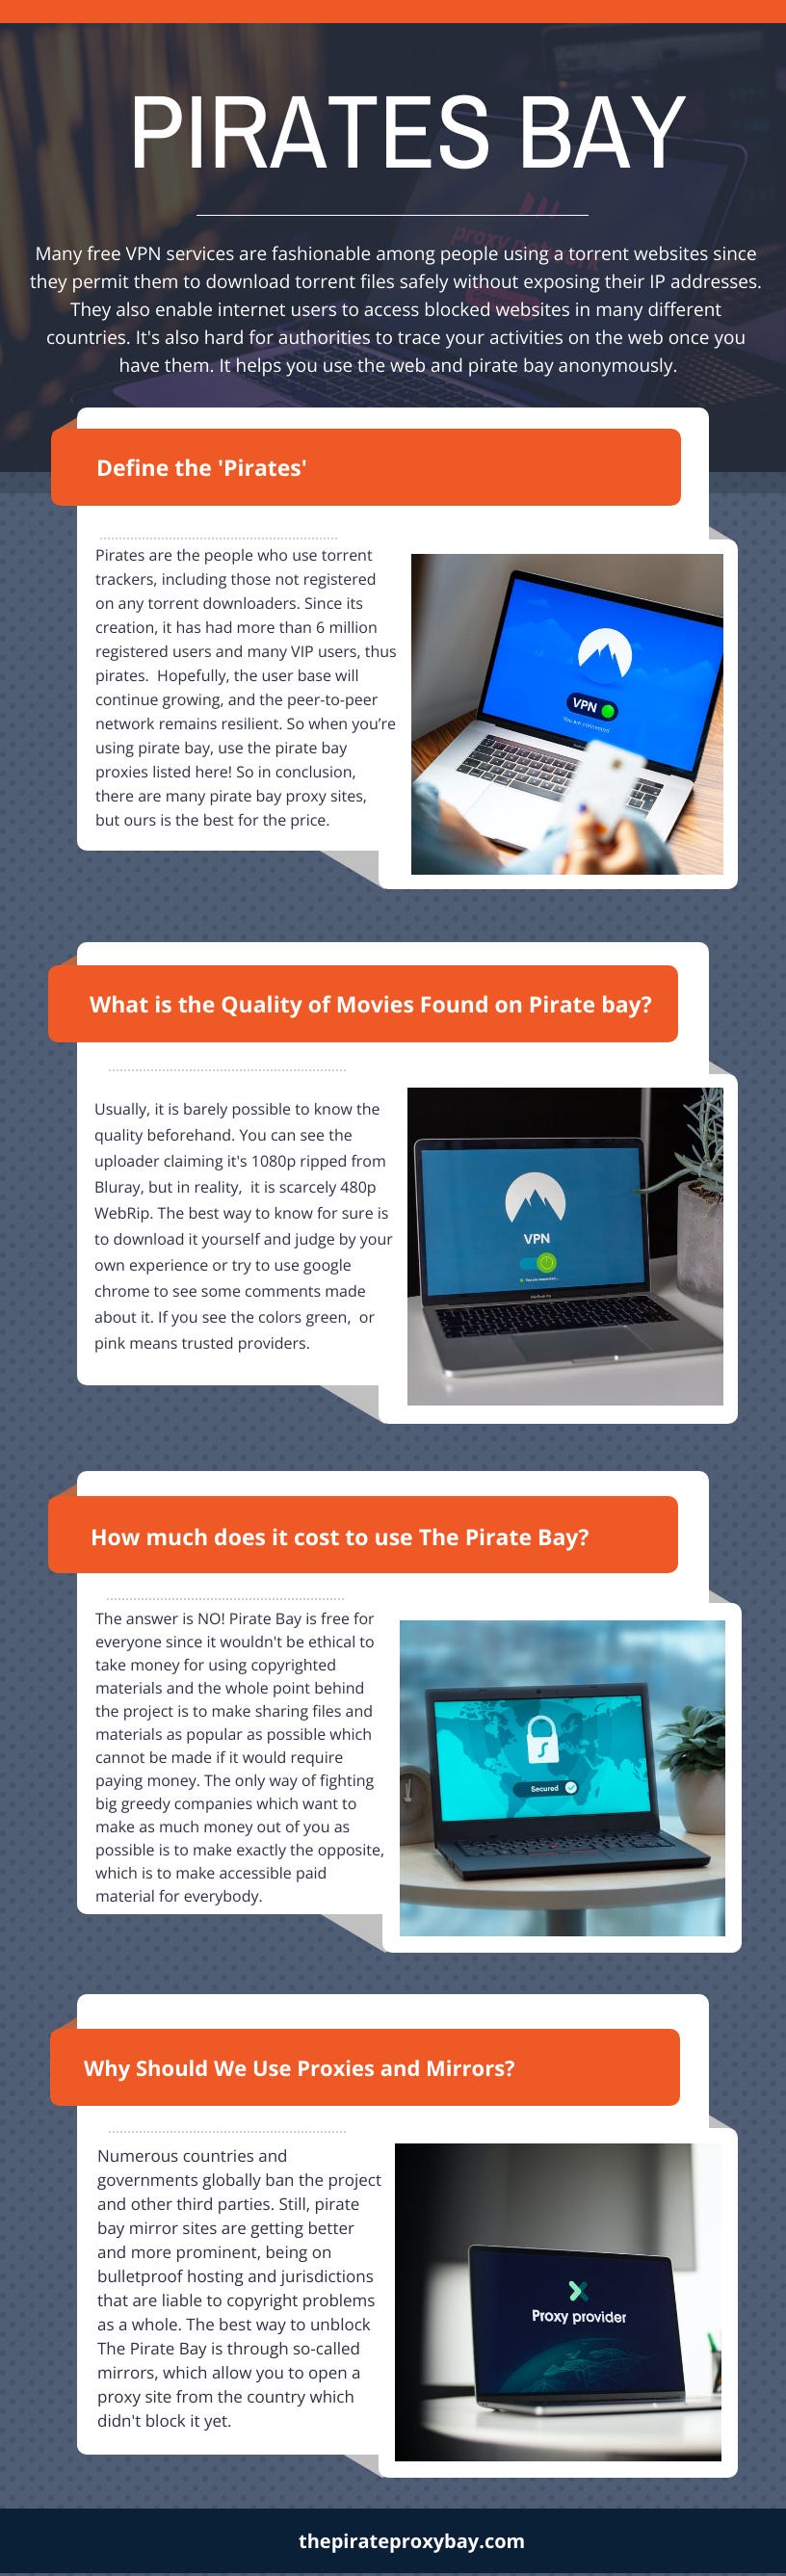 Using the Pirate Bay